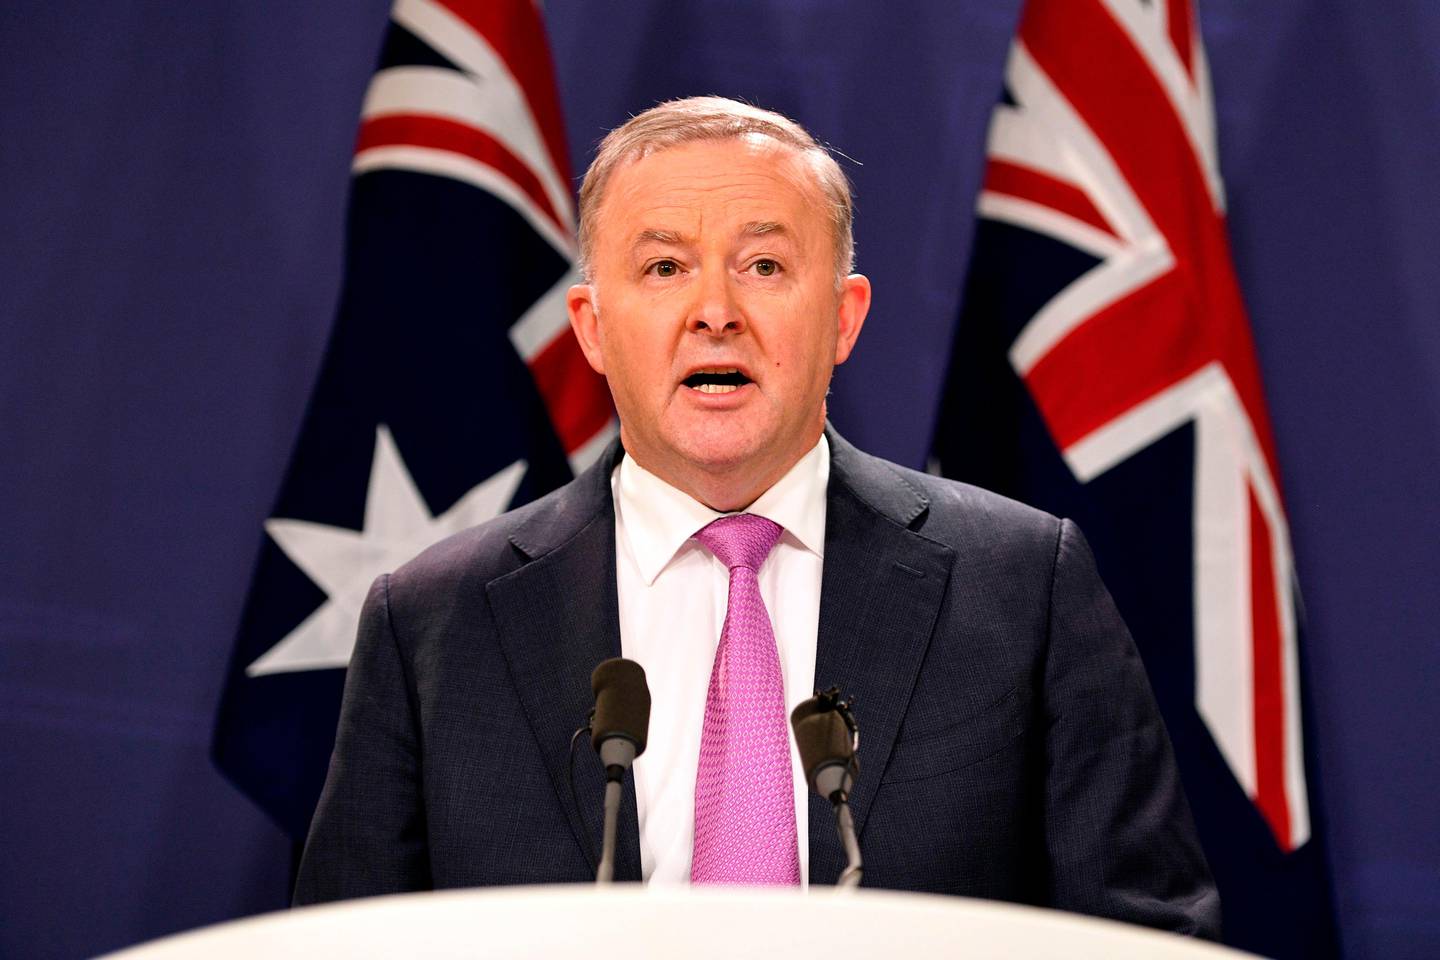 Newly elected Australia's Labor party leader Anthony Albanese speaks at press conference in Sydney on May 27, 2019. - Albanese was elected unopposed as leader of the Labor party after Bill Shorten's defeat and quick resignation after the general elections. (Photo by Saeed KHAN / AFP)